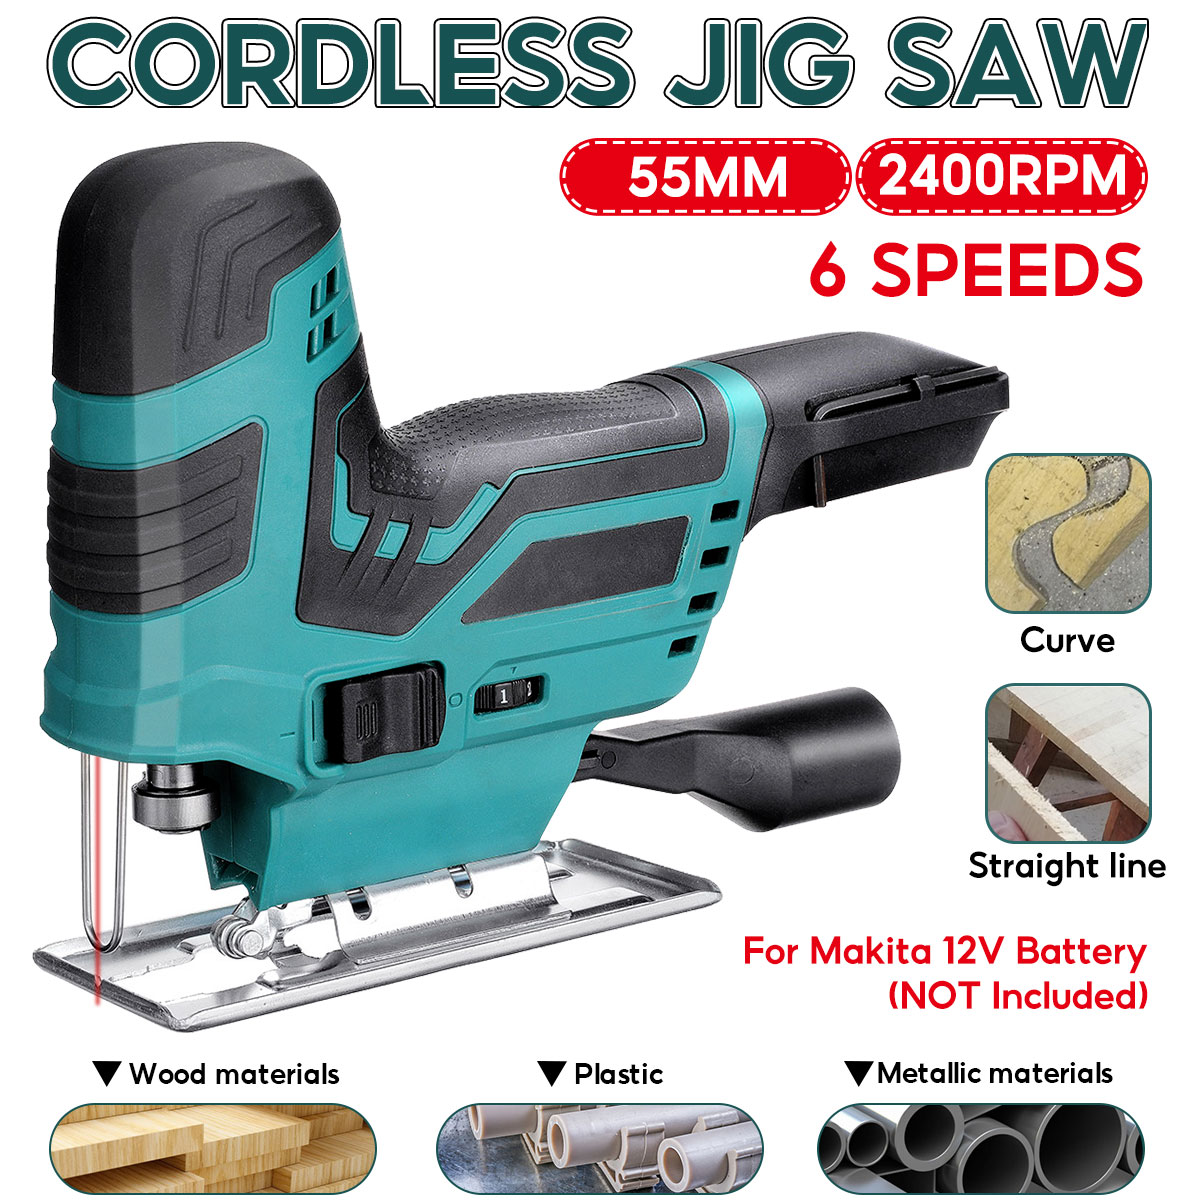 Drillpro-6-Speeds-55mm-2400RPM-Cordless-Jigsaw-Electric-Jig-Saw-Multi-function-Woodworking-Power-Too-1937968-1